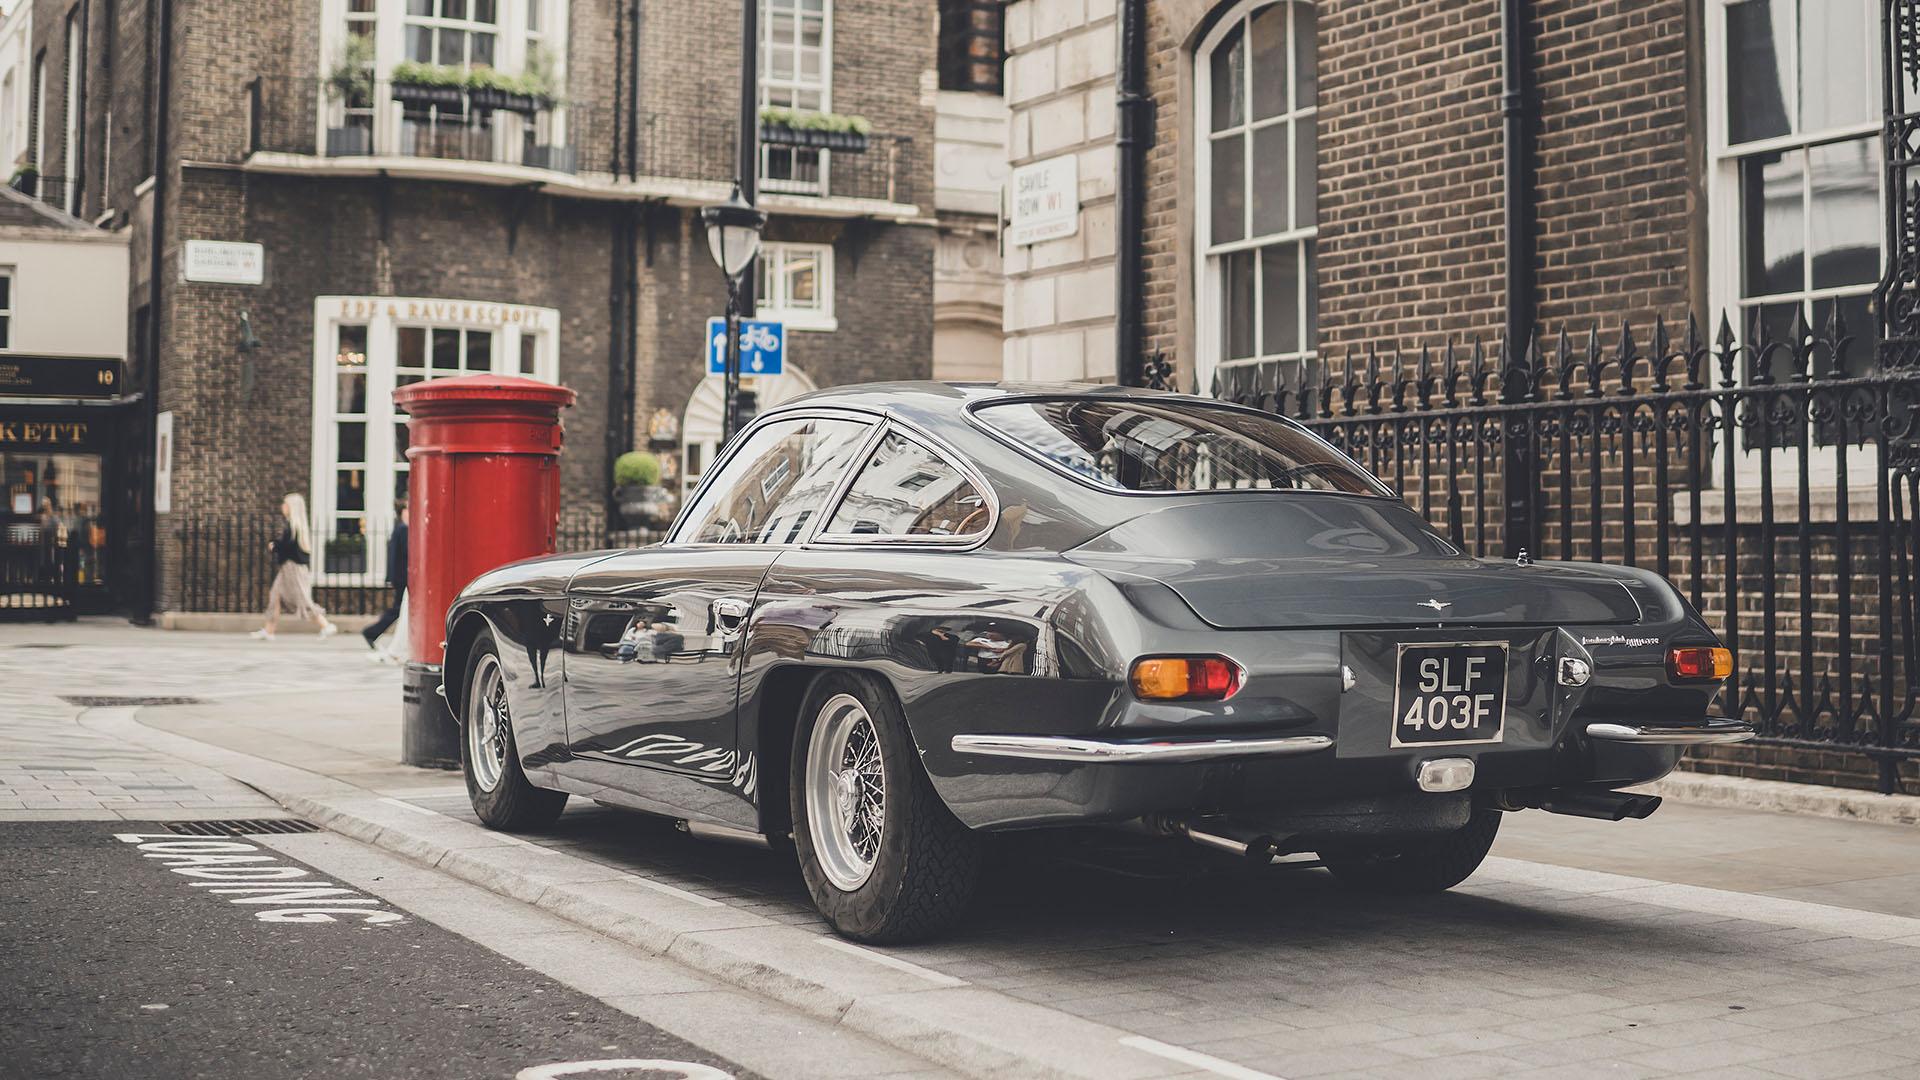 400 gt 22 tribute to the beatles 1